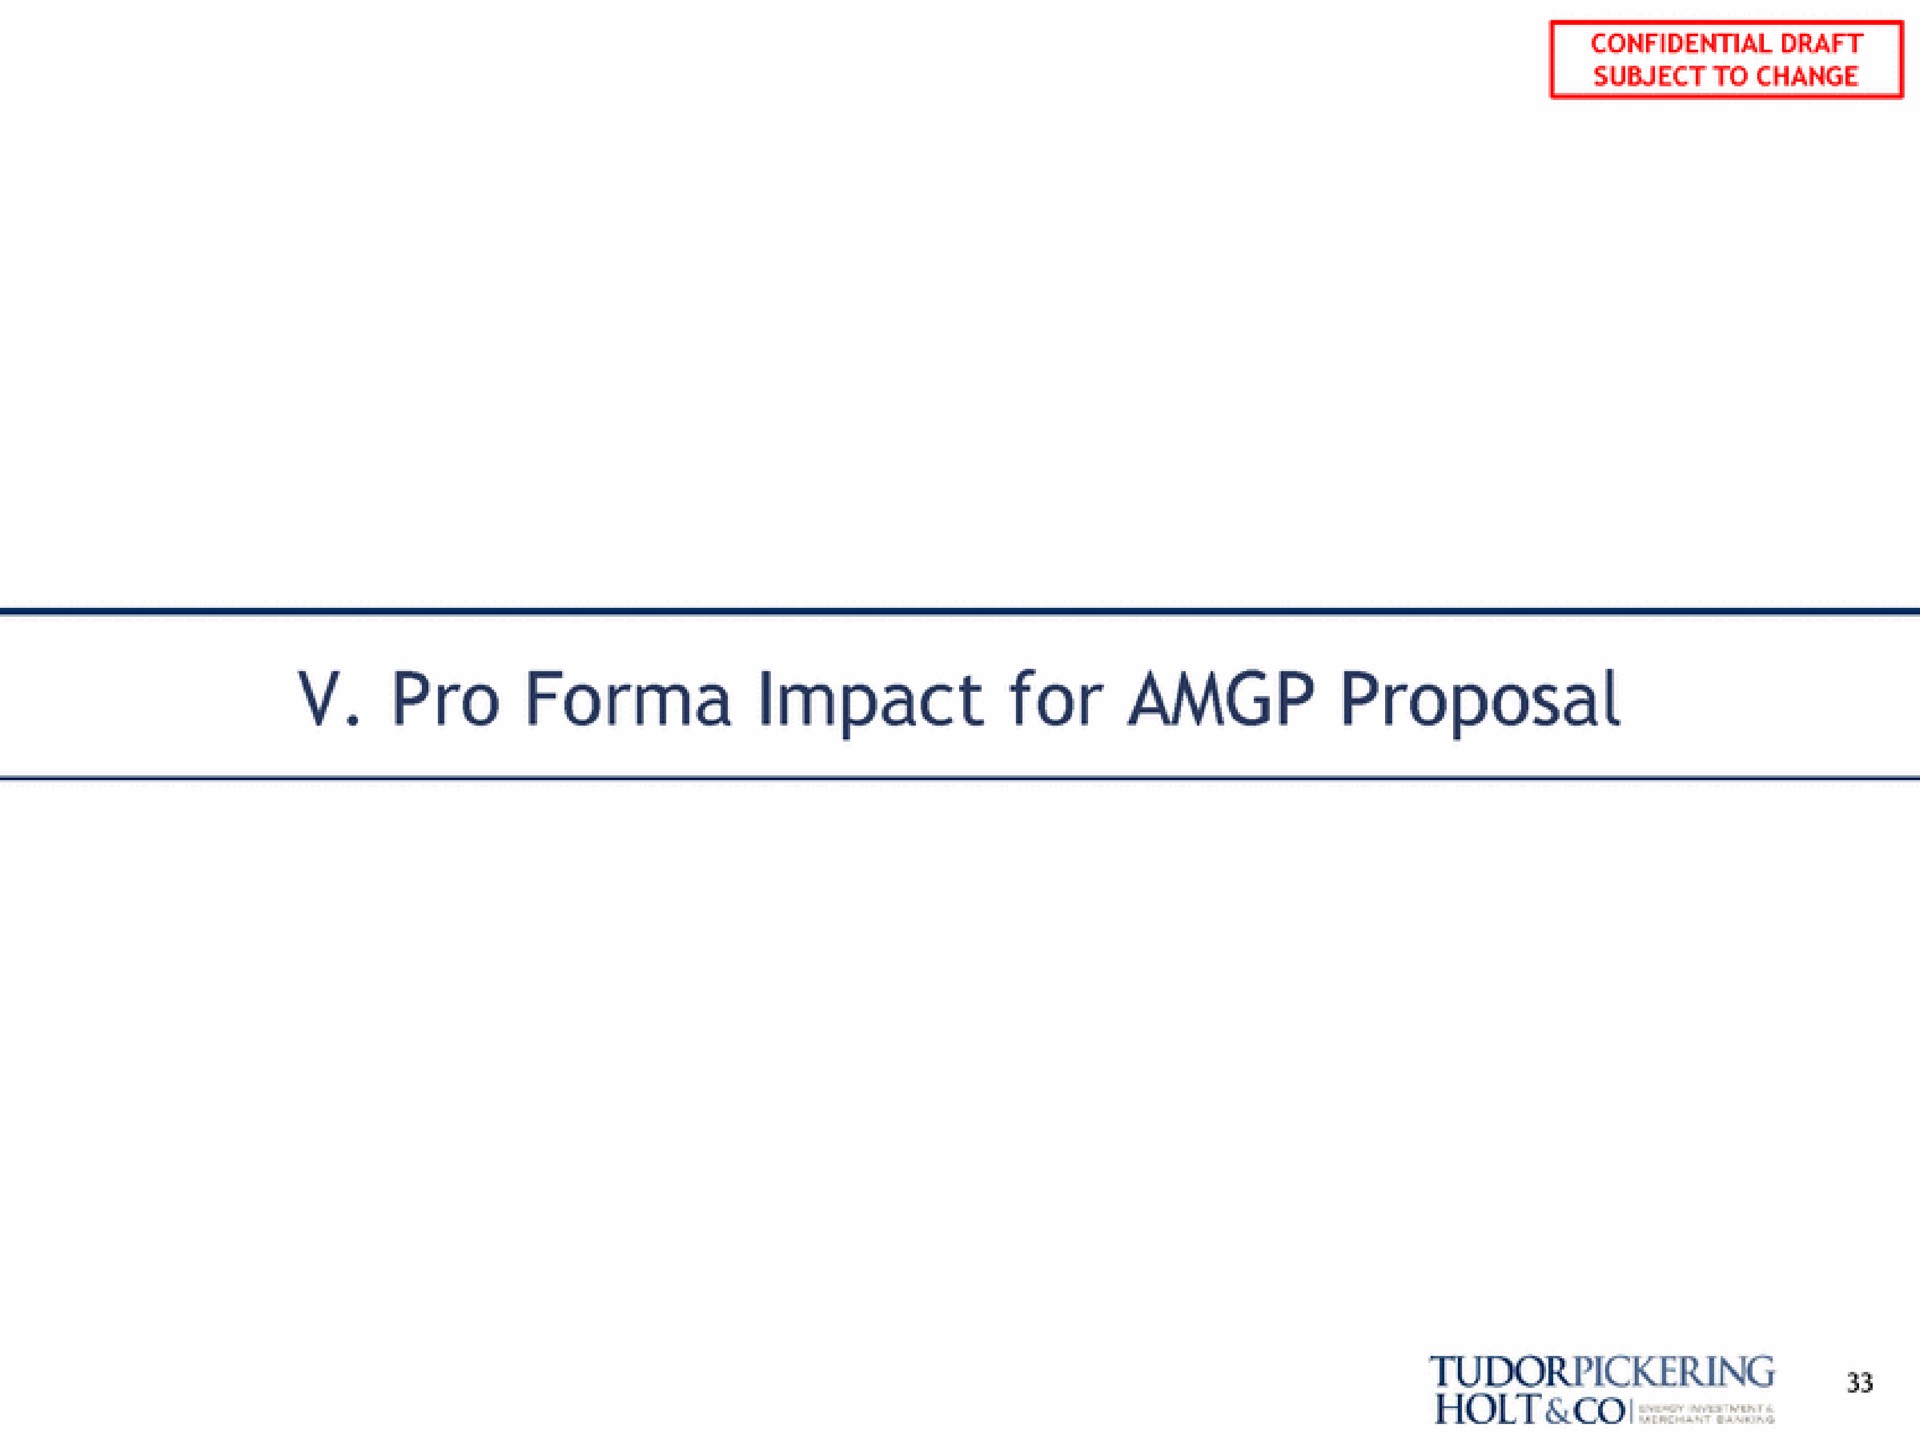 pro impact for proposal | Tudor, Pickering, Holt & Co